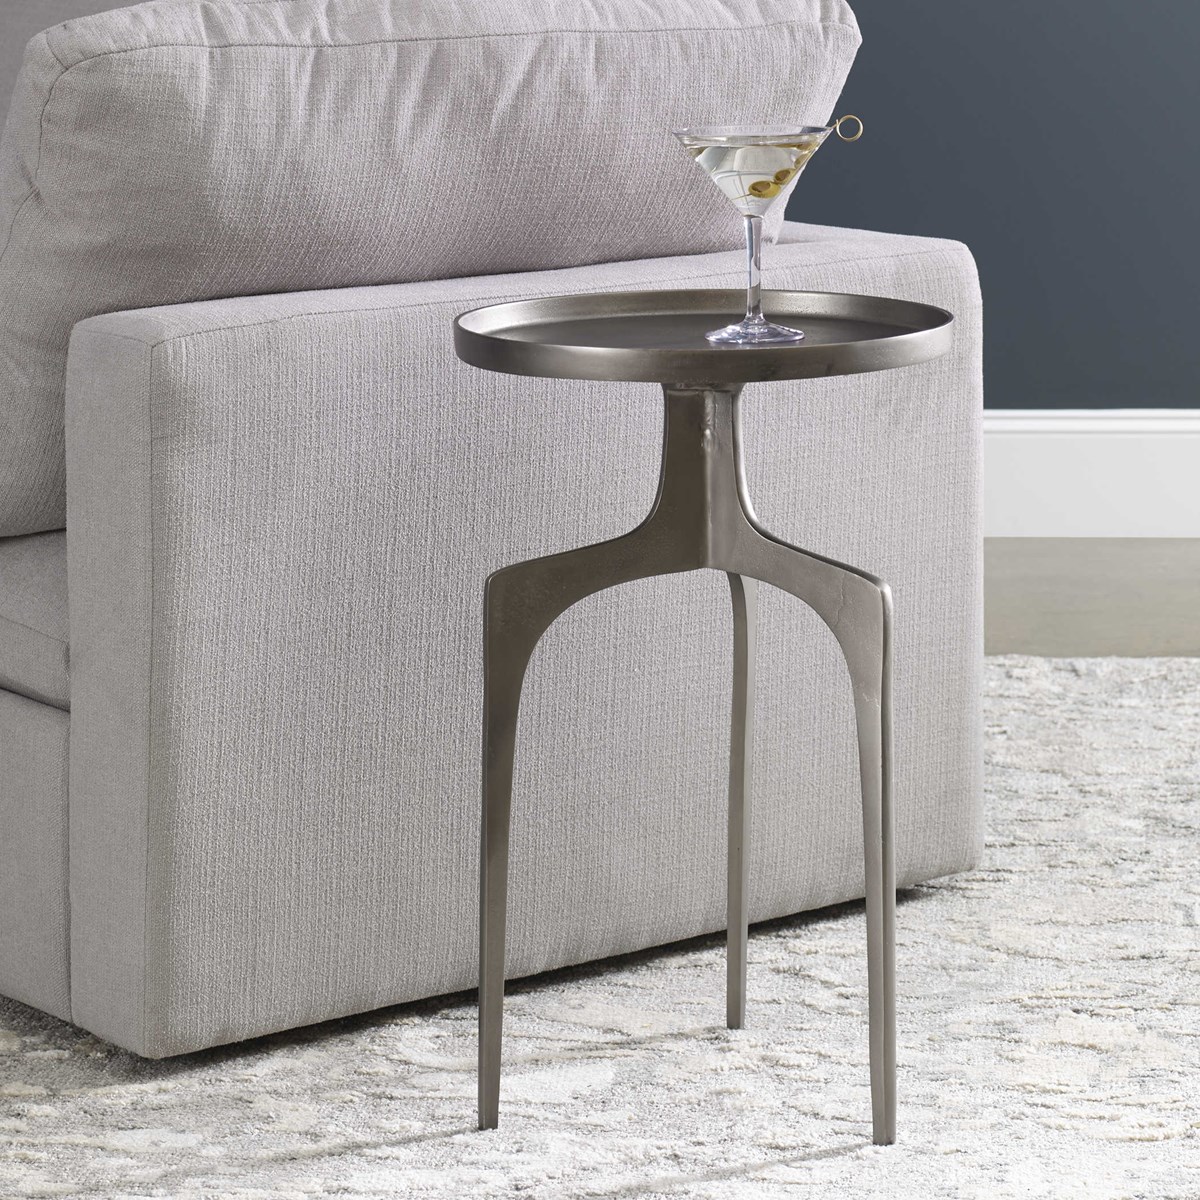 Picture of 212 Main 25082 17.32 x 14.96 x 26.38 in. Kenna Accent Table  Nickel